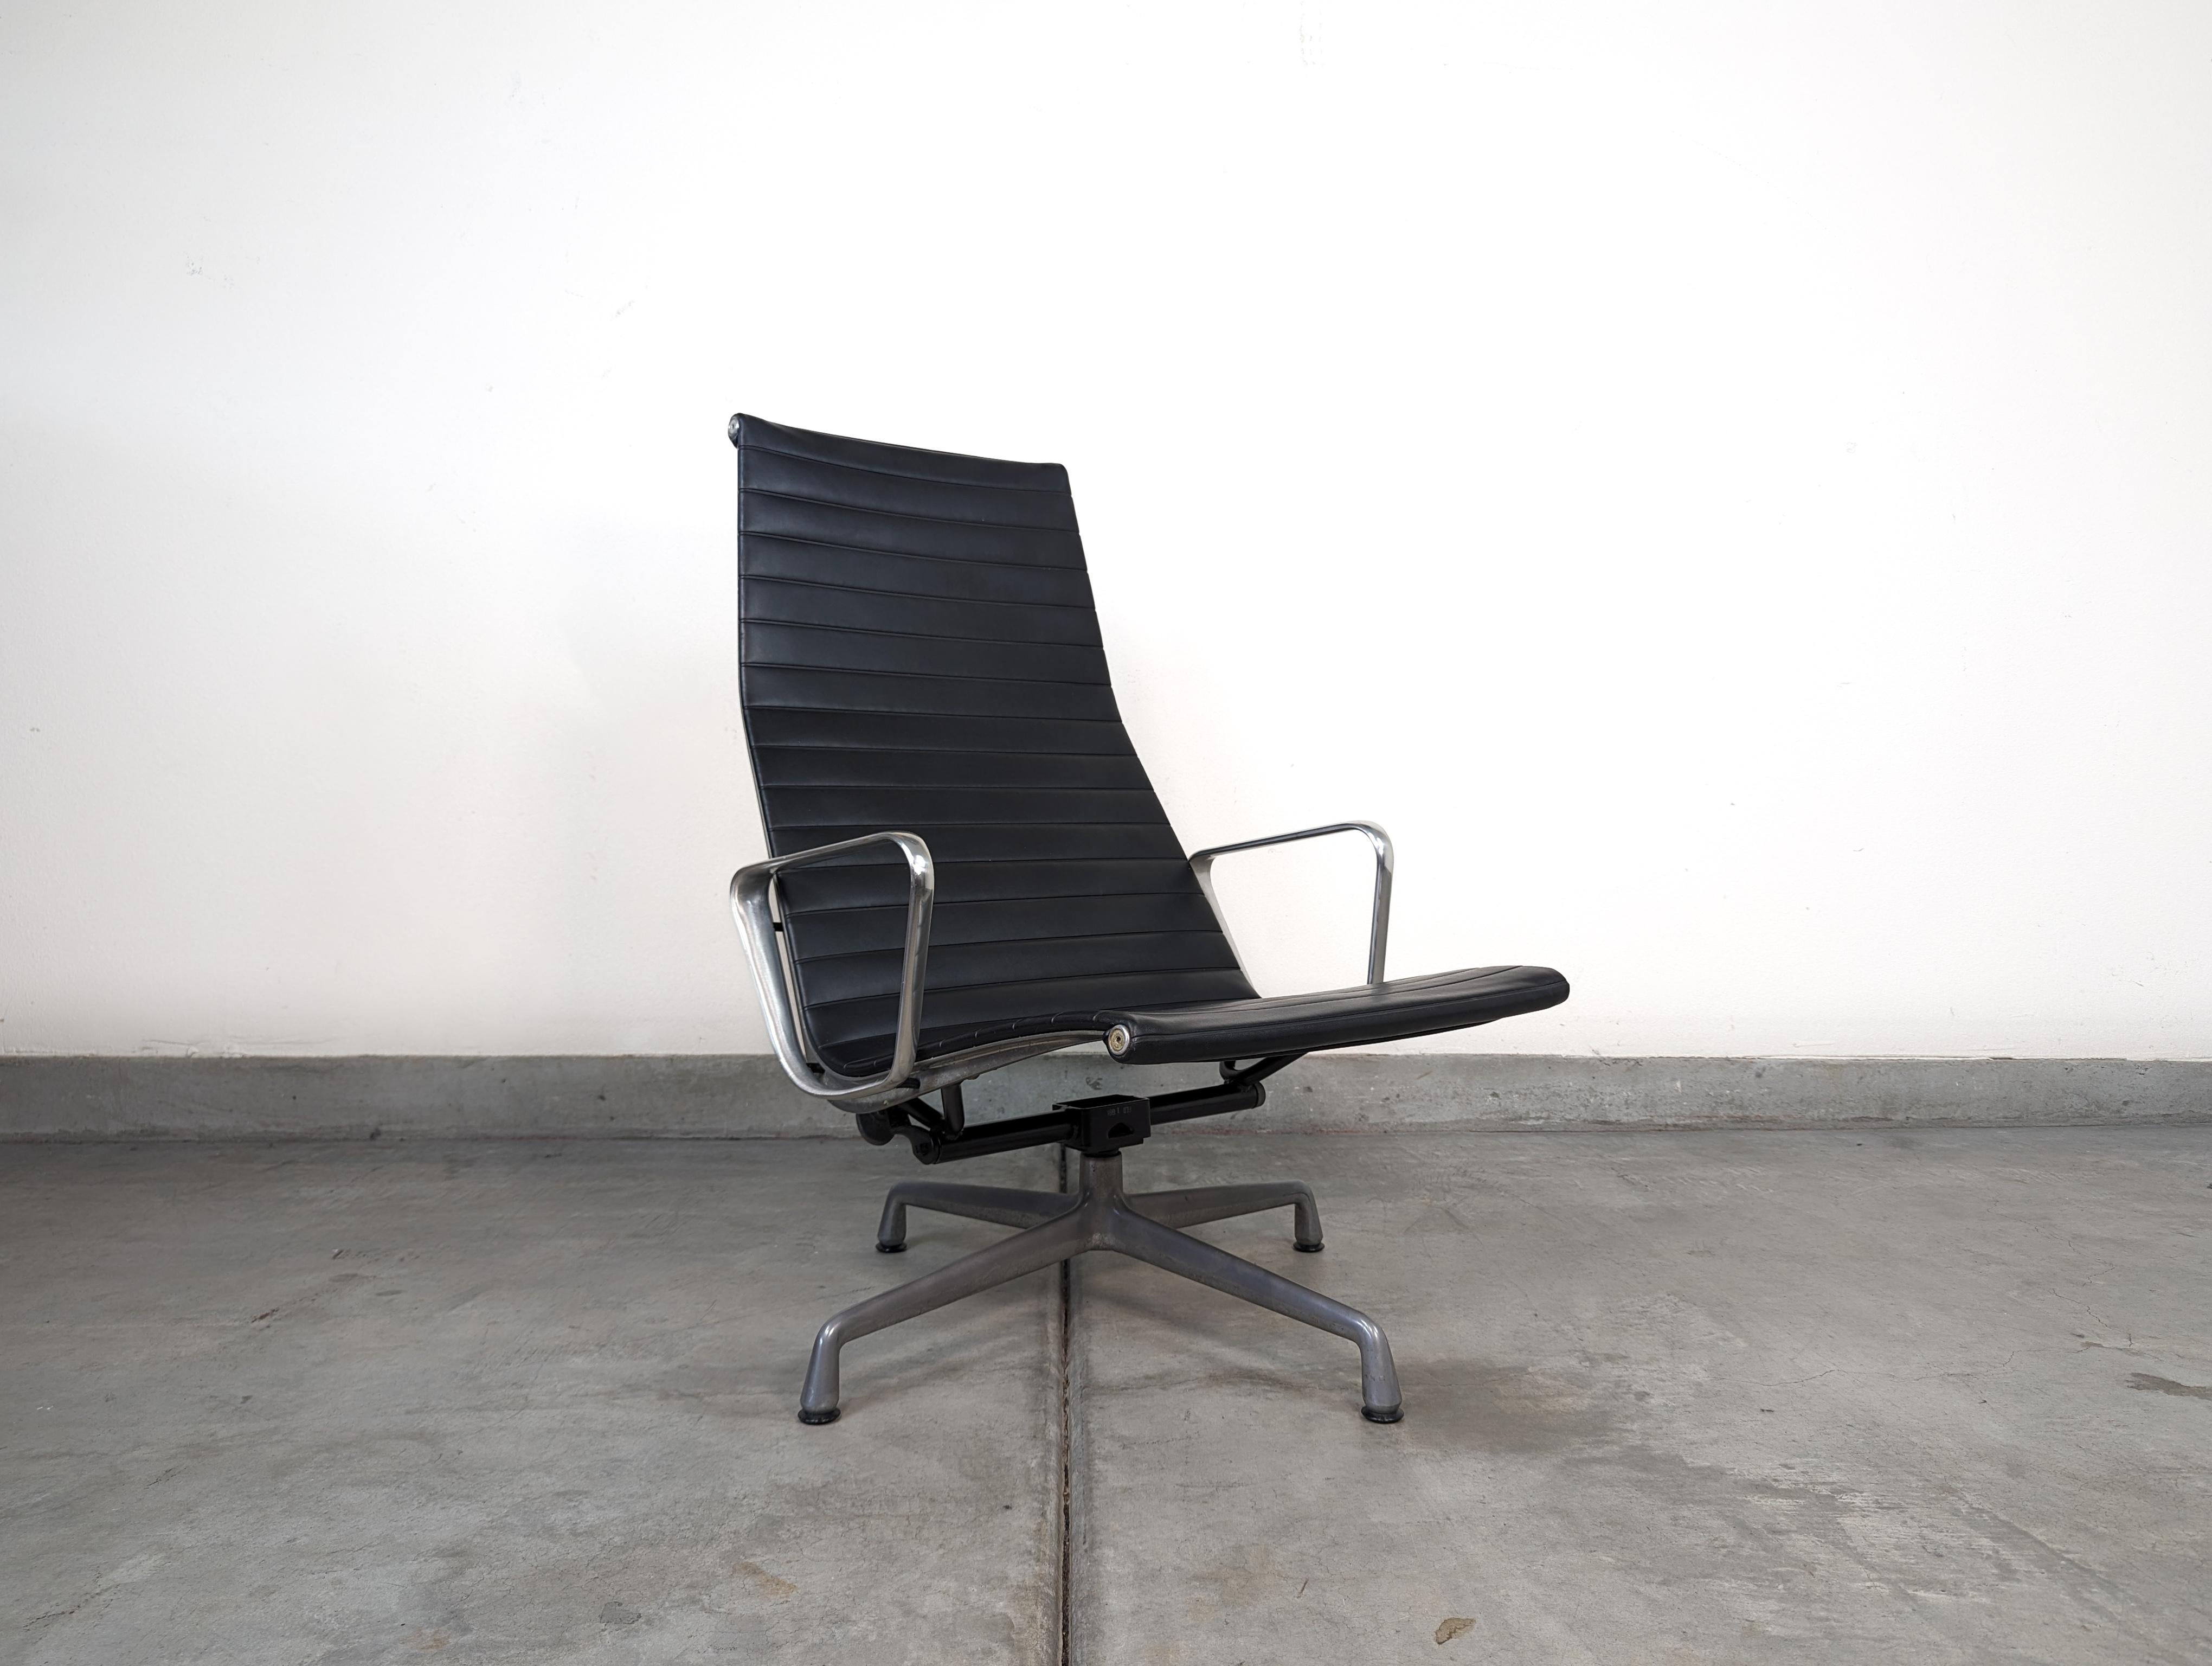 Eames Aluminum Group Lounge Office Chair by Herman Miller, c1990s For Sale 1